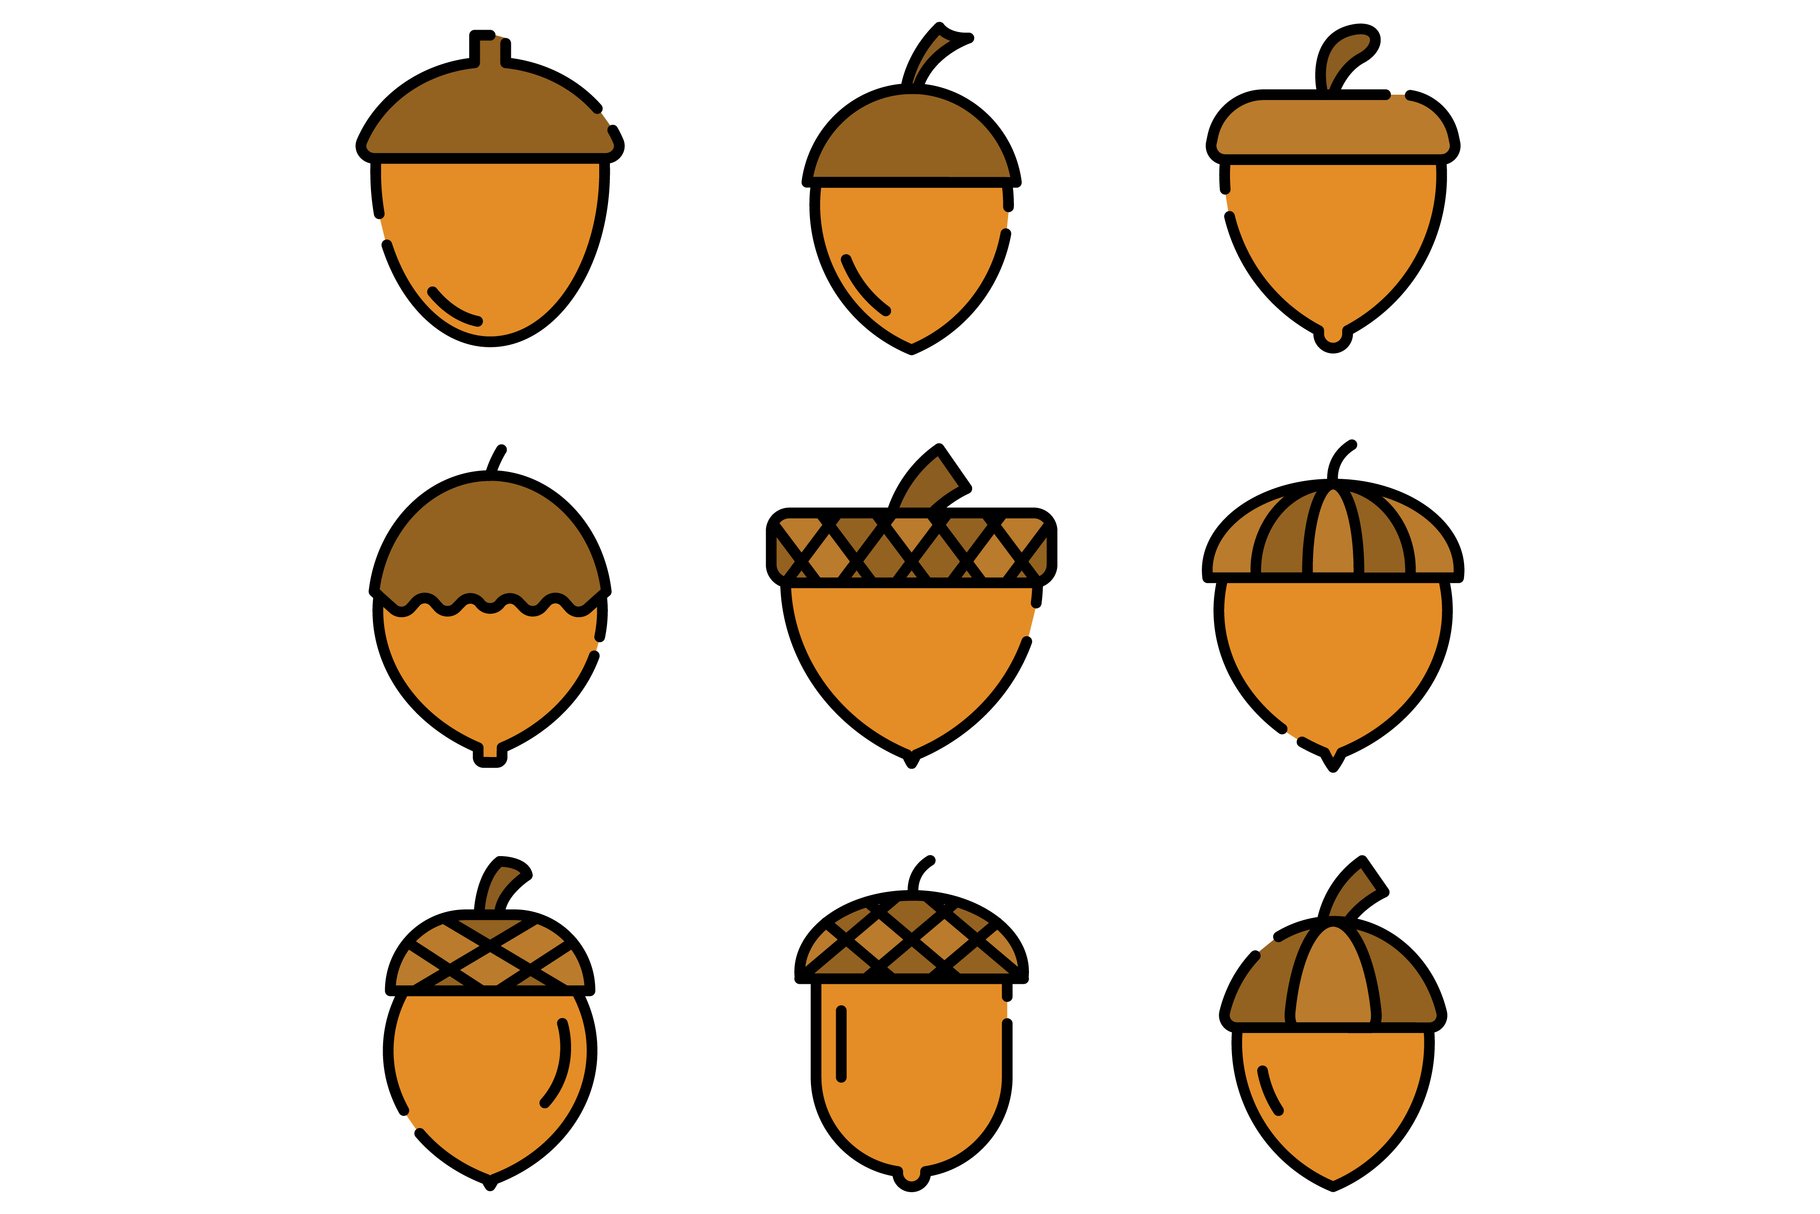 Acorn icons vector flat cover image.